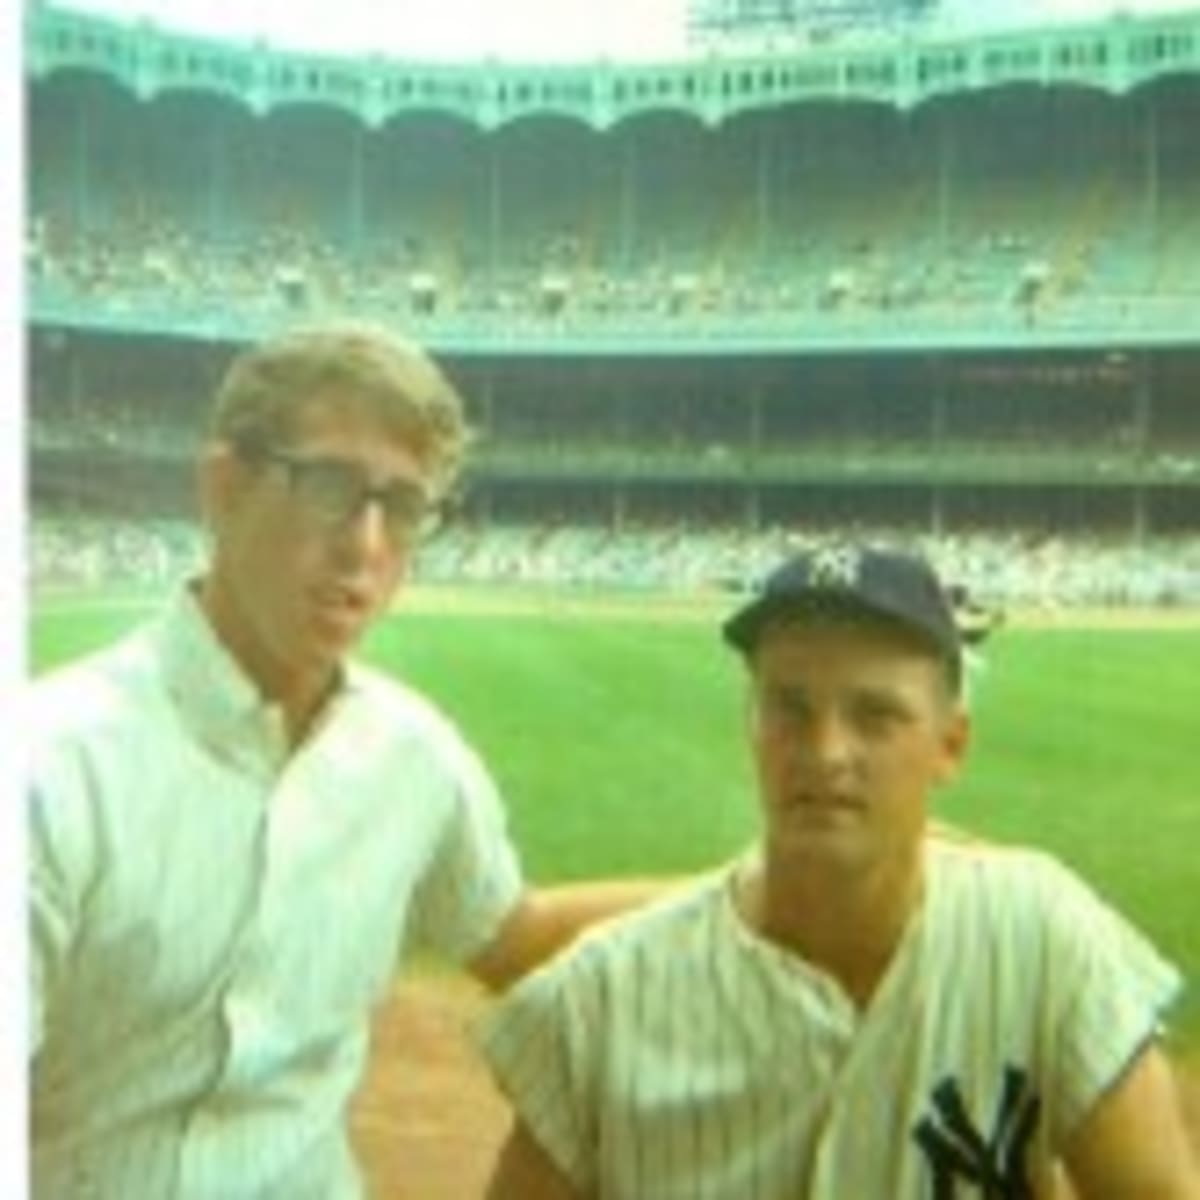 Roger Maris and the Great Home Run Chase - Sports Collectors Digest